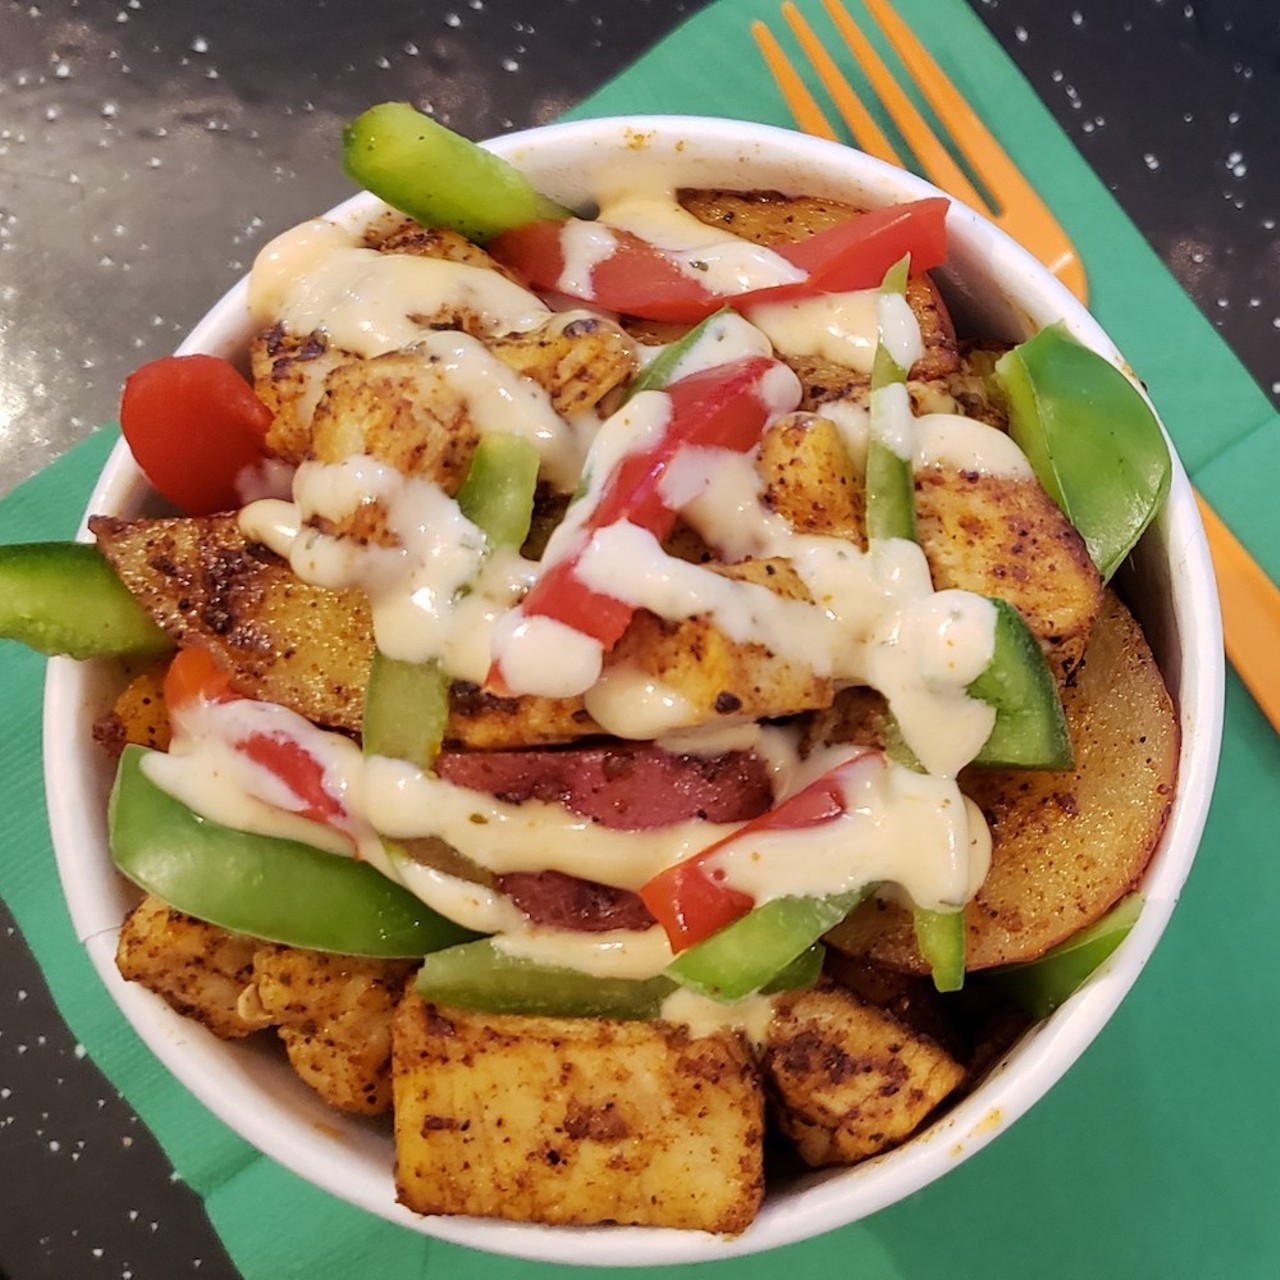 Spicy Loaded Potato Bowl
This spin on the Ma's Irish Kitchen classic finishes Cajun potatoes with grilled chicken, bell peppers and spicy ranch.